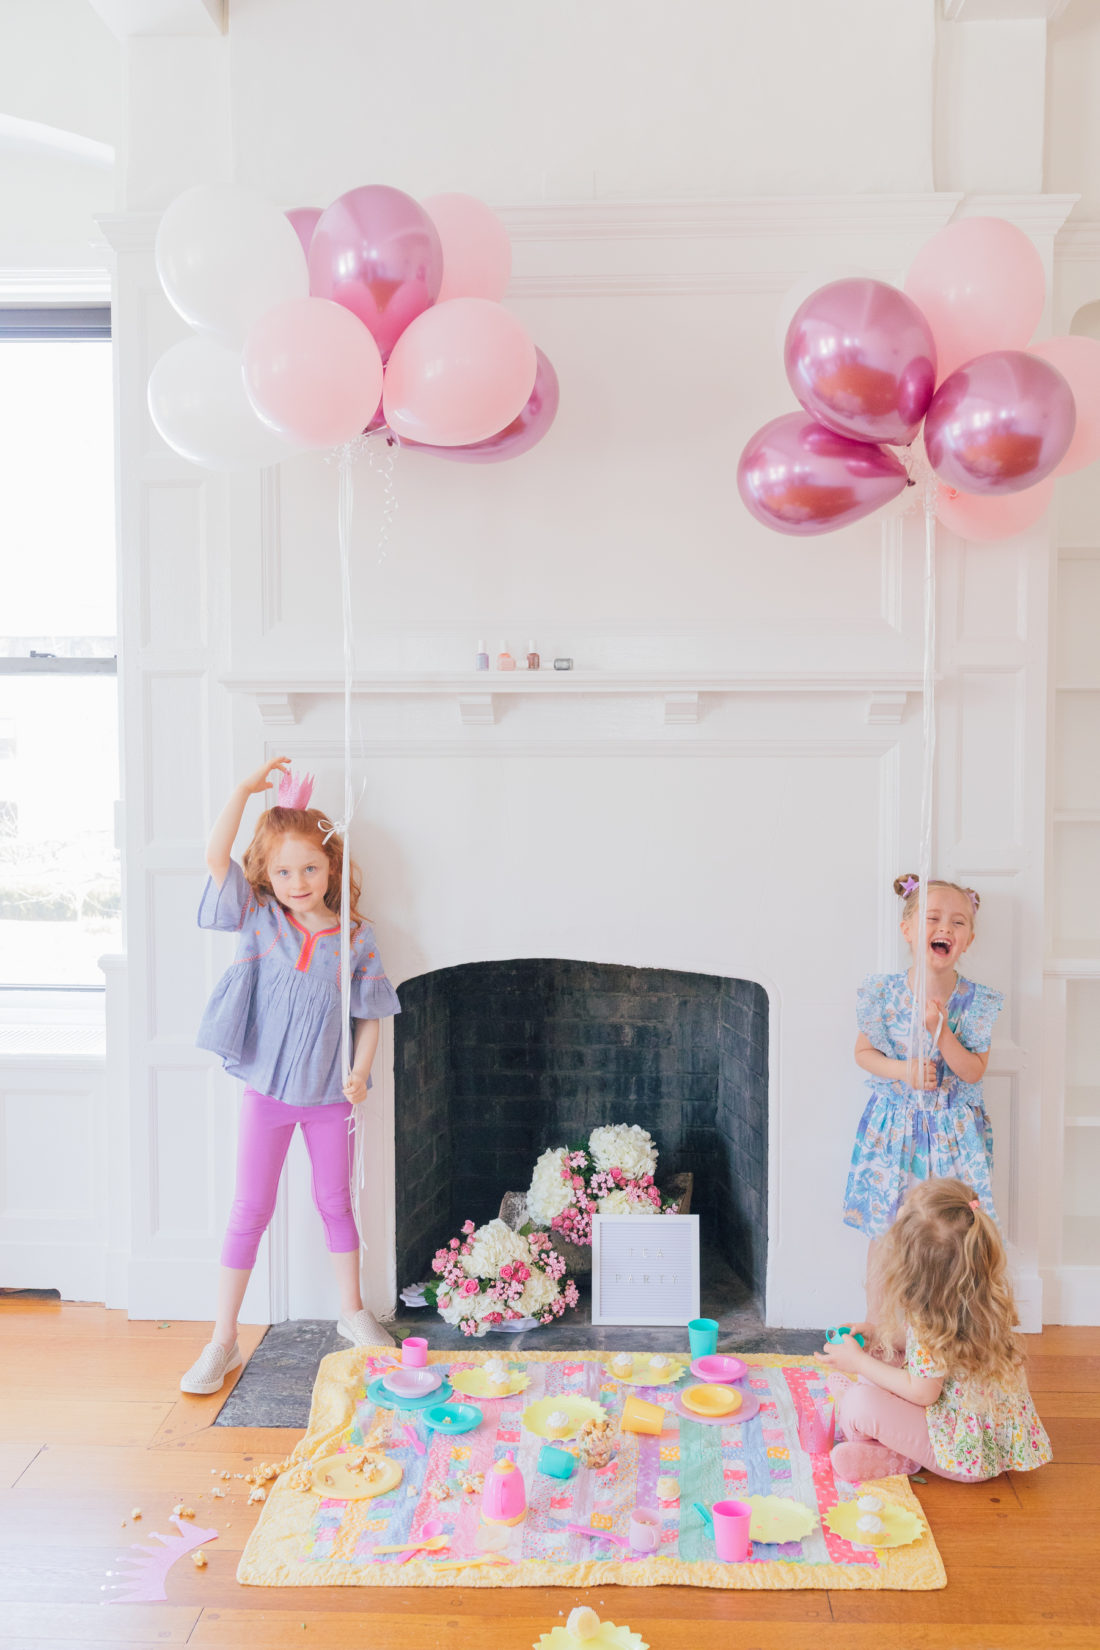 Eva Amurri Martino of Happily Eva After, Sarah, owner of Indigo Acupuncture + Wellness, Lauren, owner Dudley Stephens, and blogger Julia from Lemon Stripes throw a tea party for their daughters